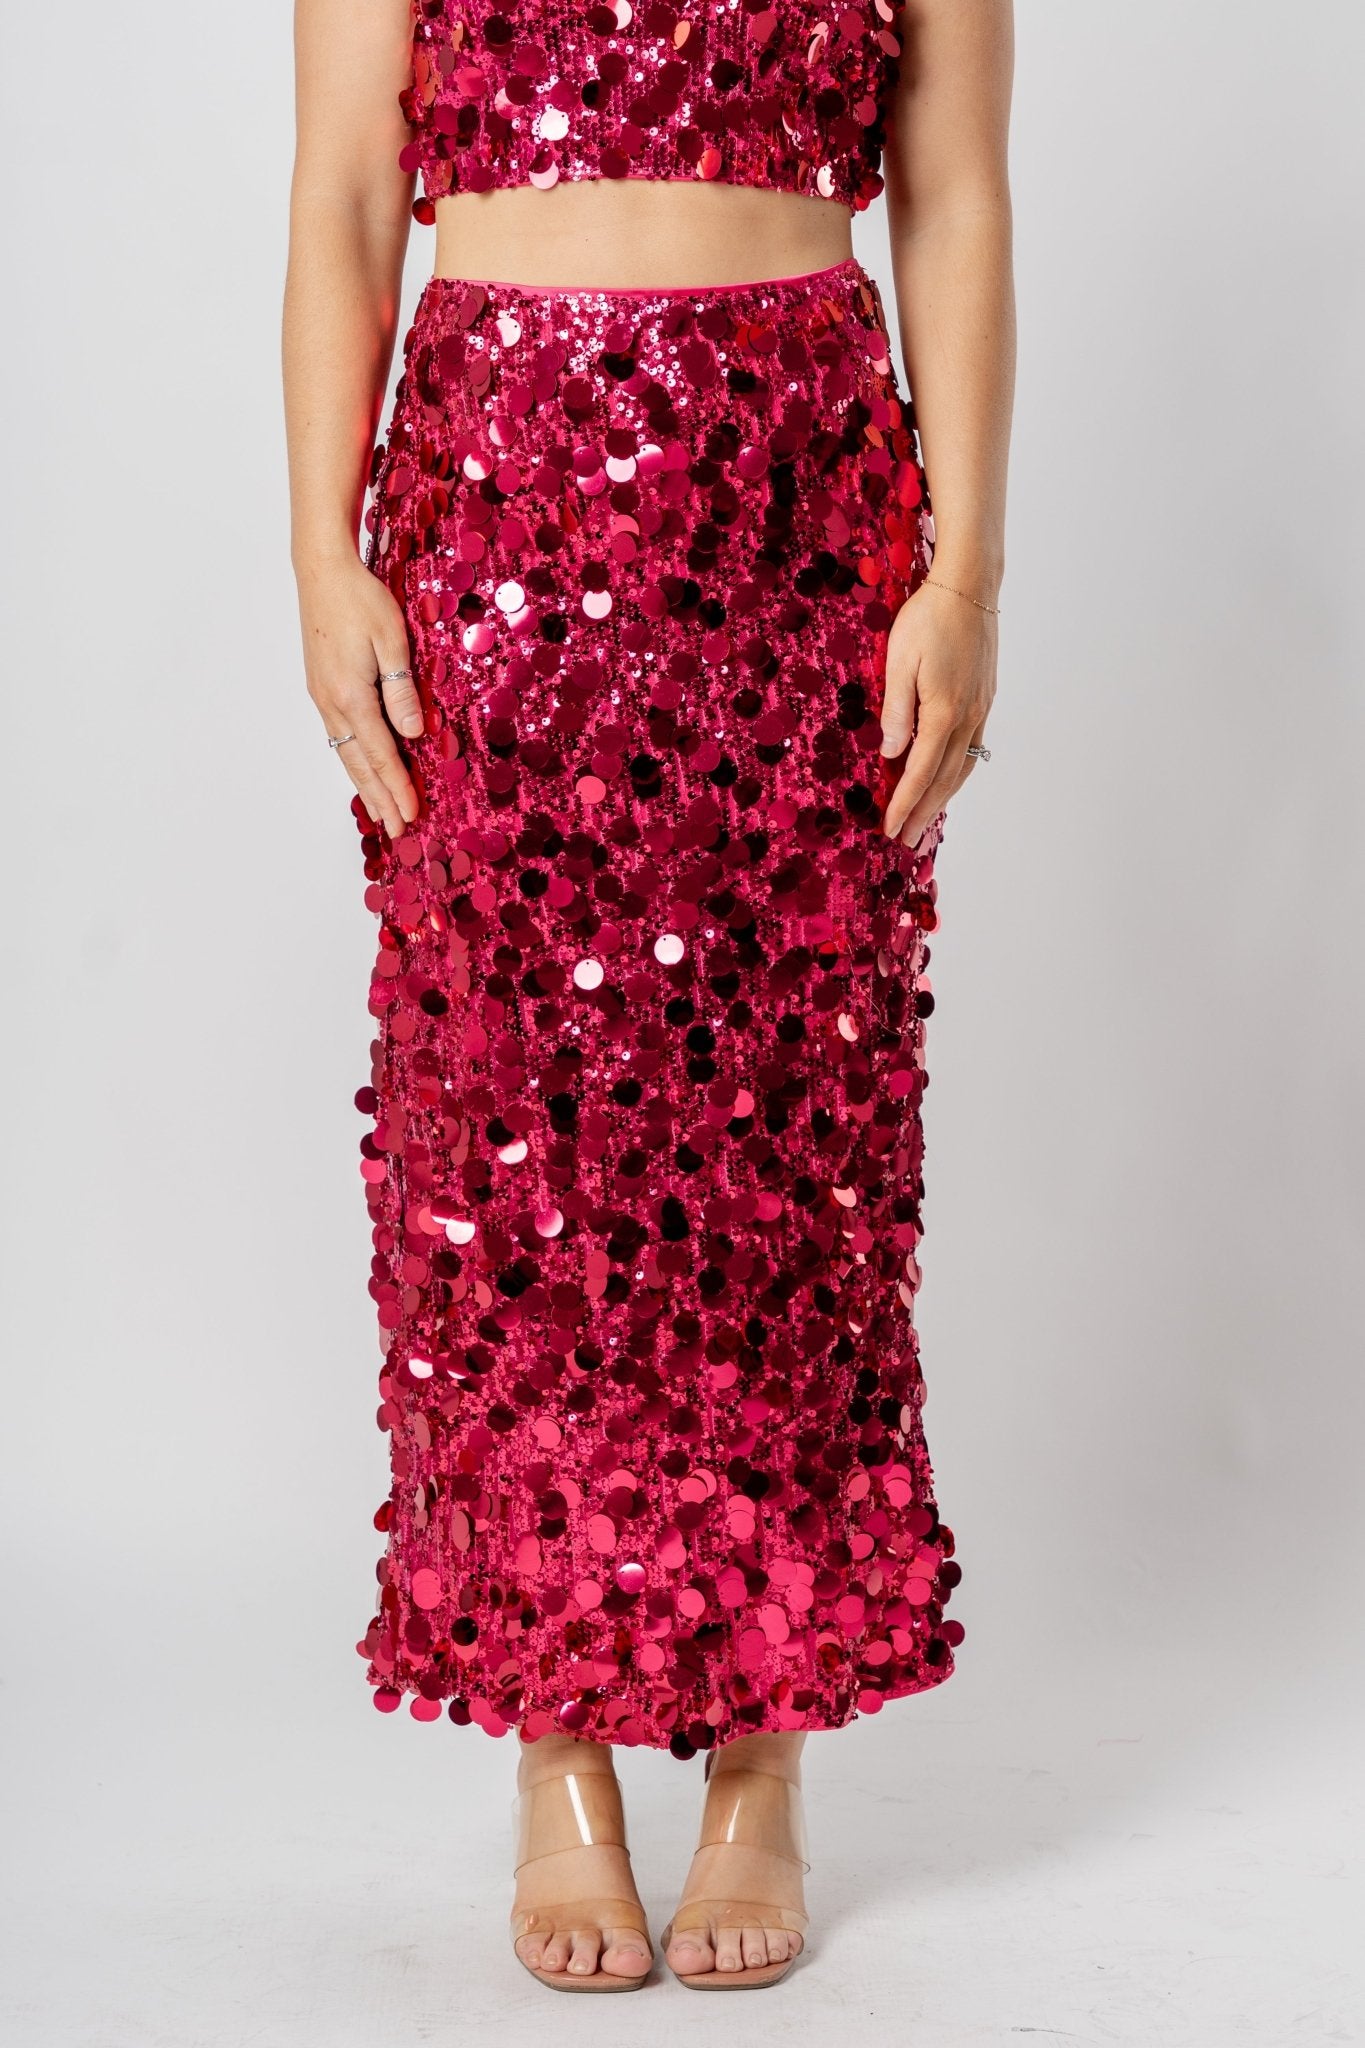 Sequin midi skirt pink - Affordable New Year's Eve Party Outfits at Lush Fashion Lounge Boutique in Oklahoma City